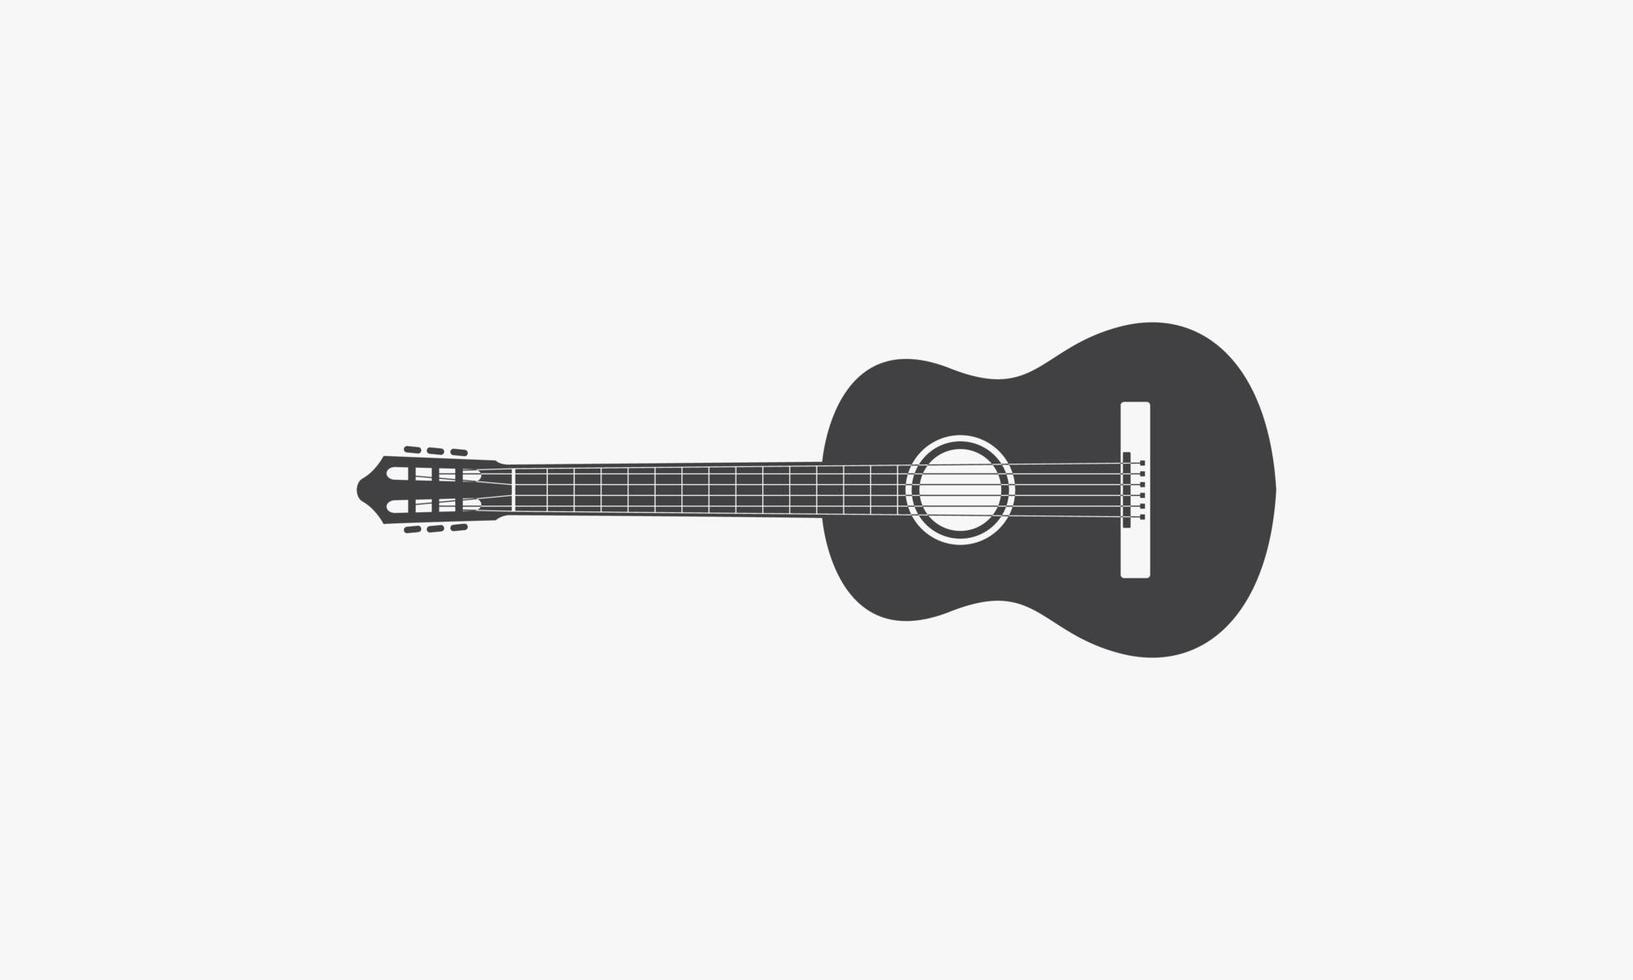 guitar acoustic icon. vector illustration. isolated on white background.